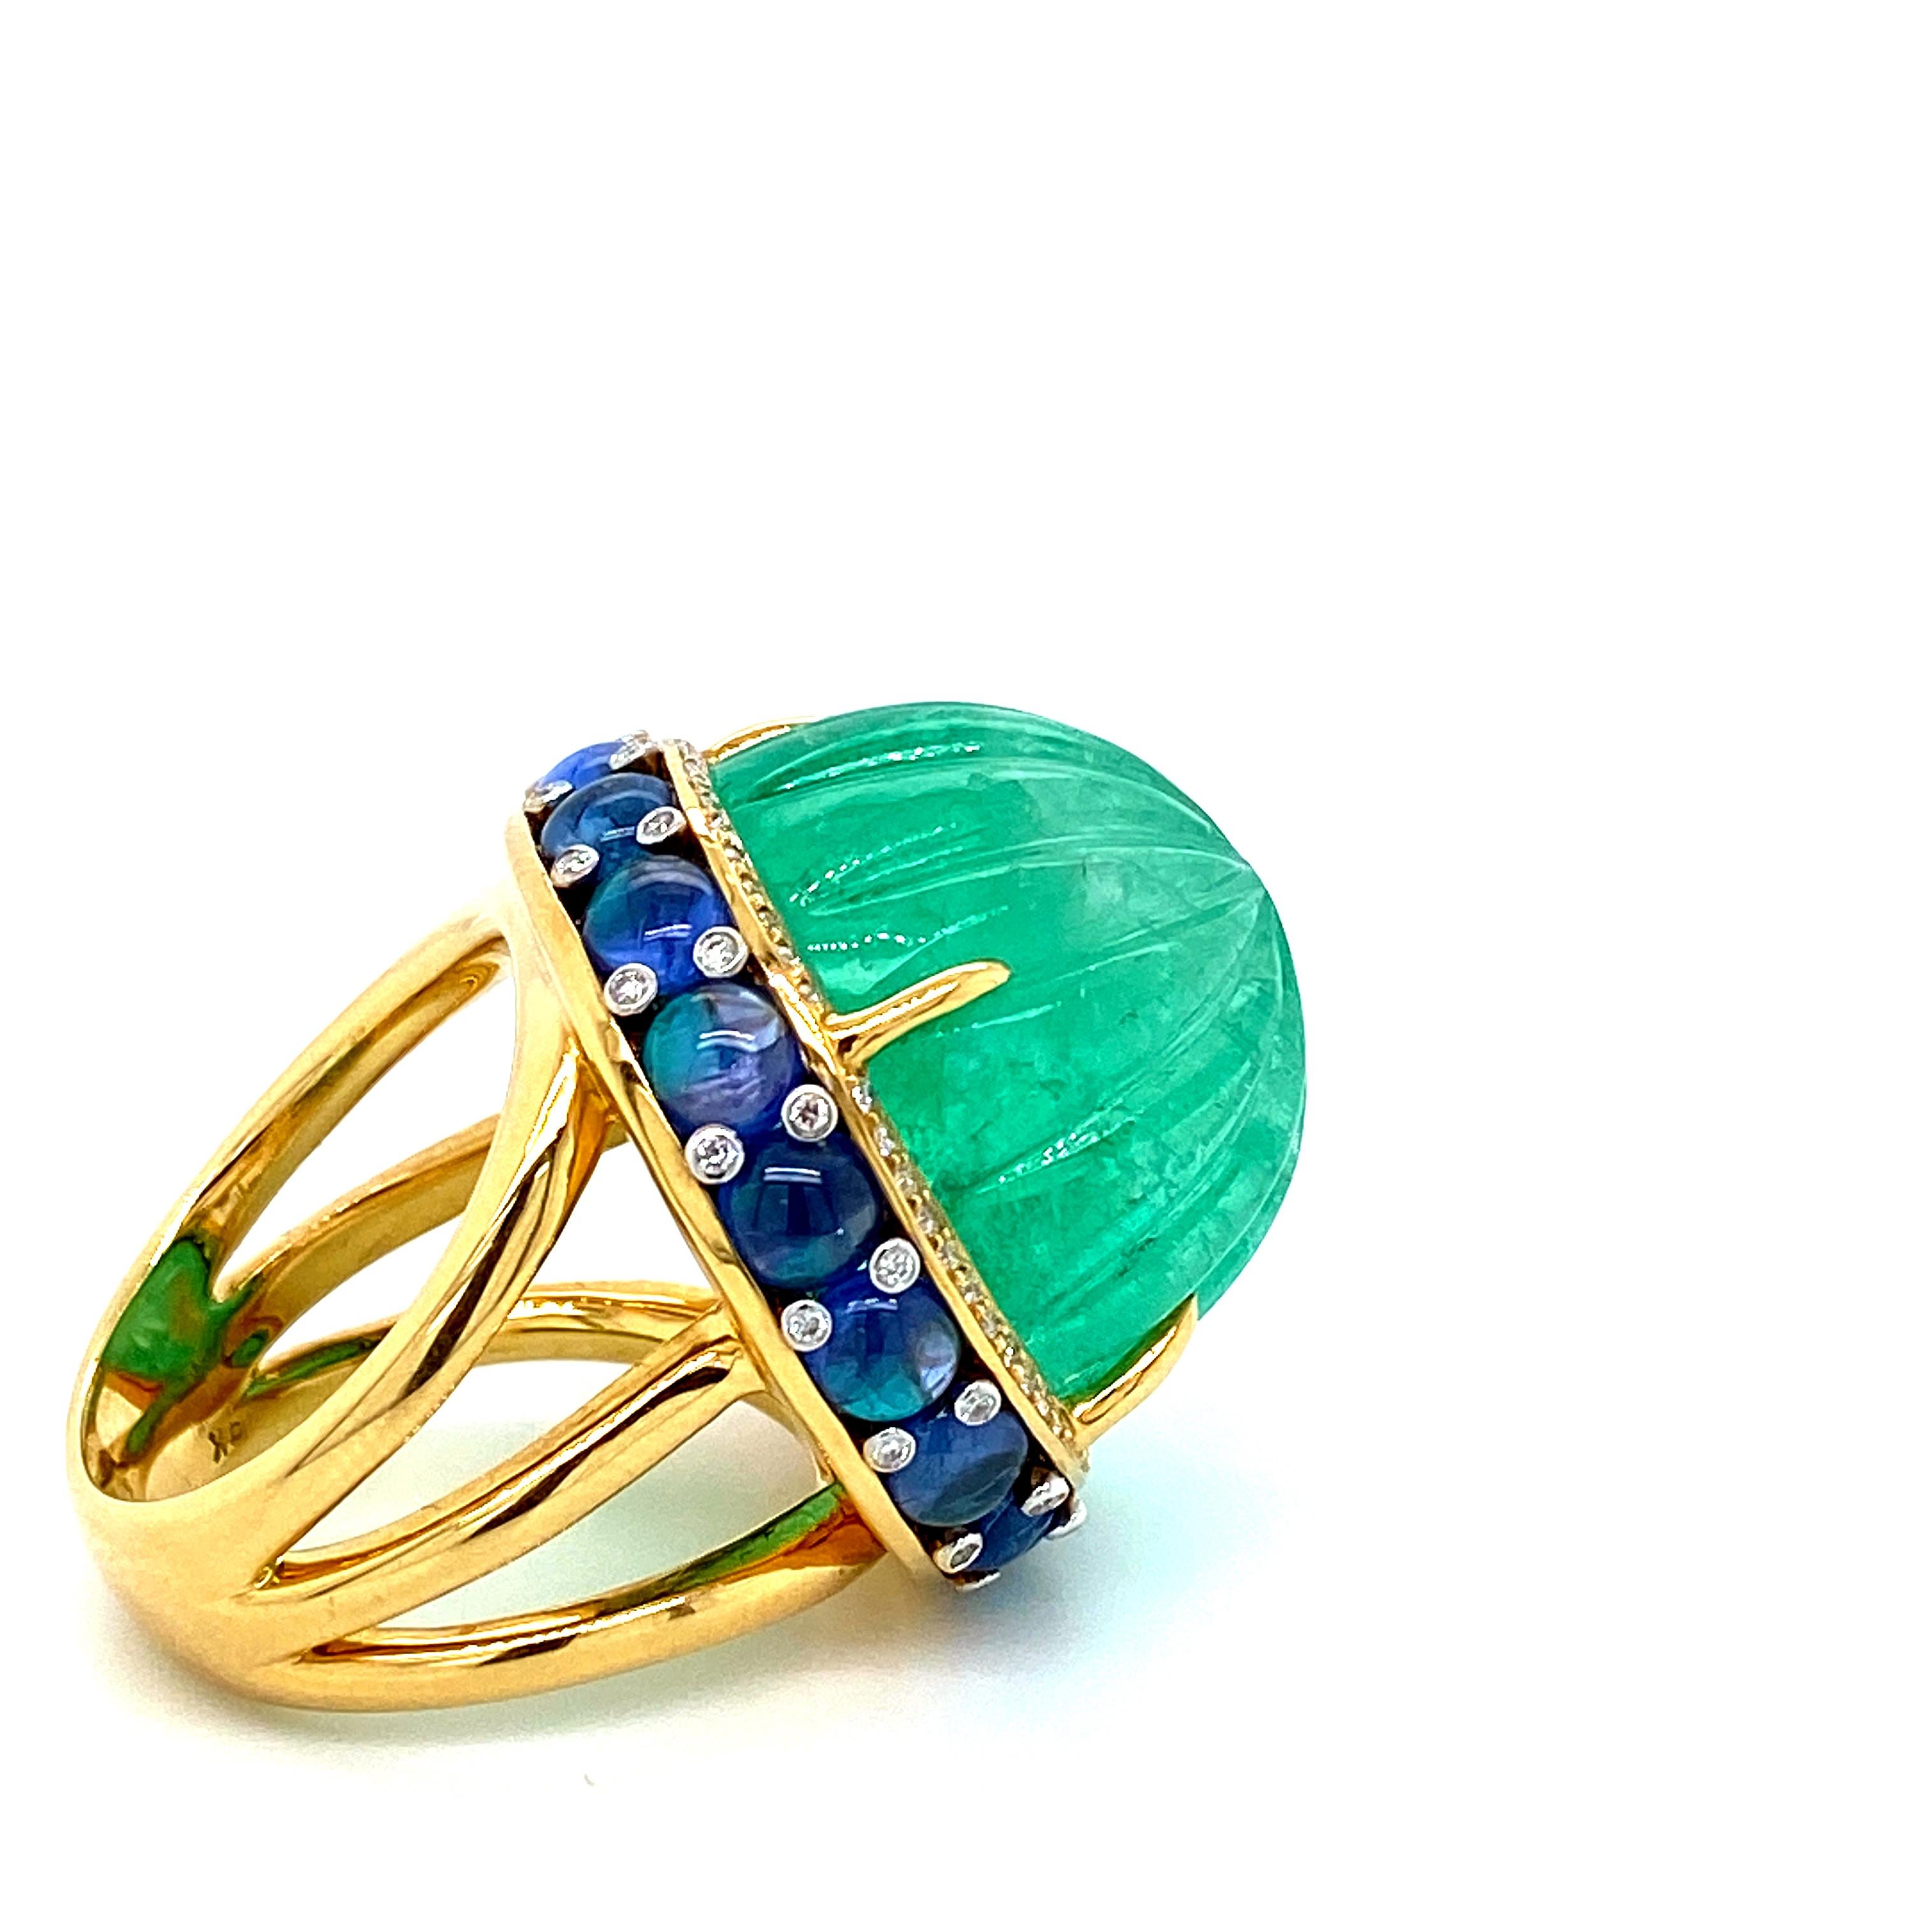 48.07 Carat GRS Certified Colombian Carved Emerald And Diamond Cocktail Ring:

A magnificent and rare ring, it features a massive 48.07 carat GRS Certified carved Colombian Emerald cabochon, accented by Blue Sapphire Cabochons weighing 8.94 carat